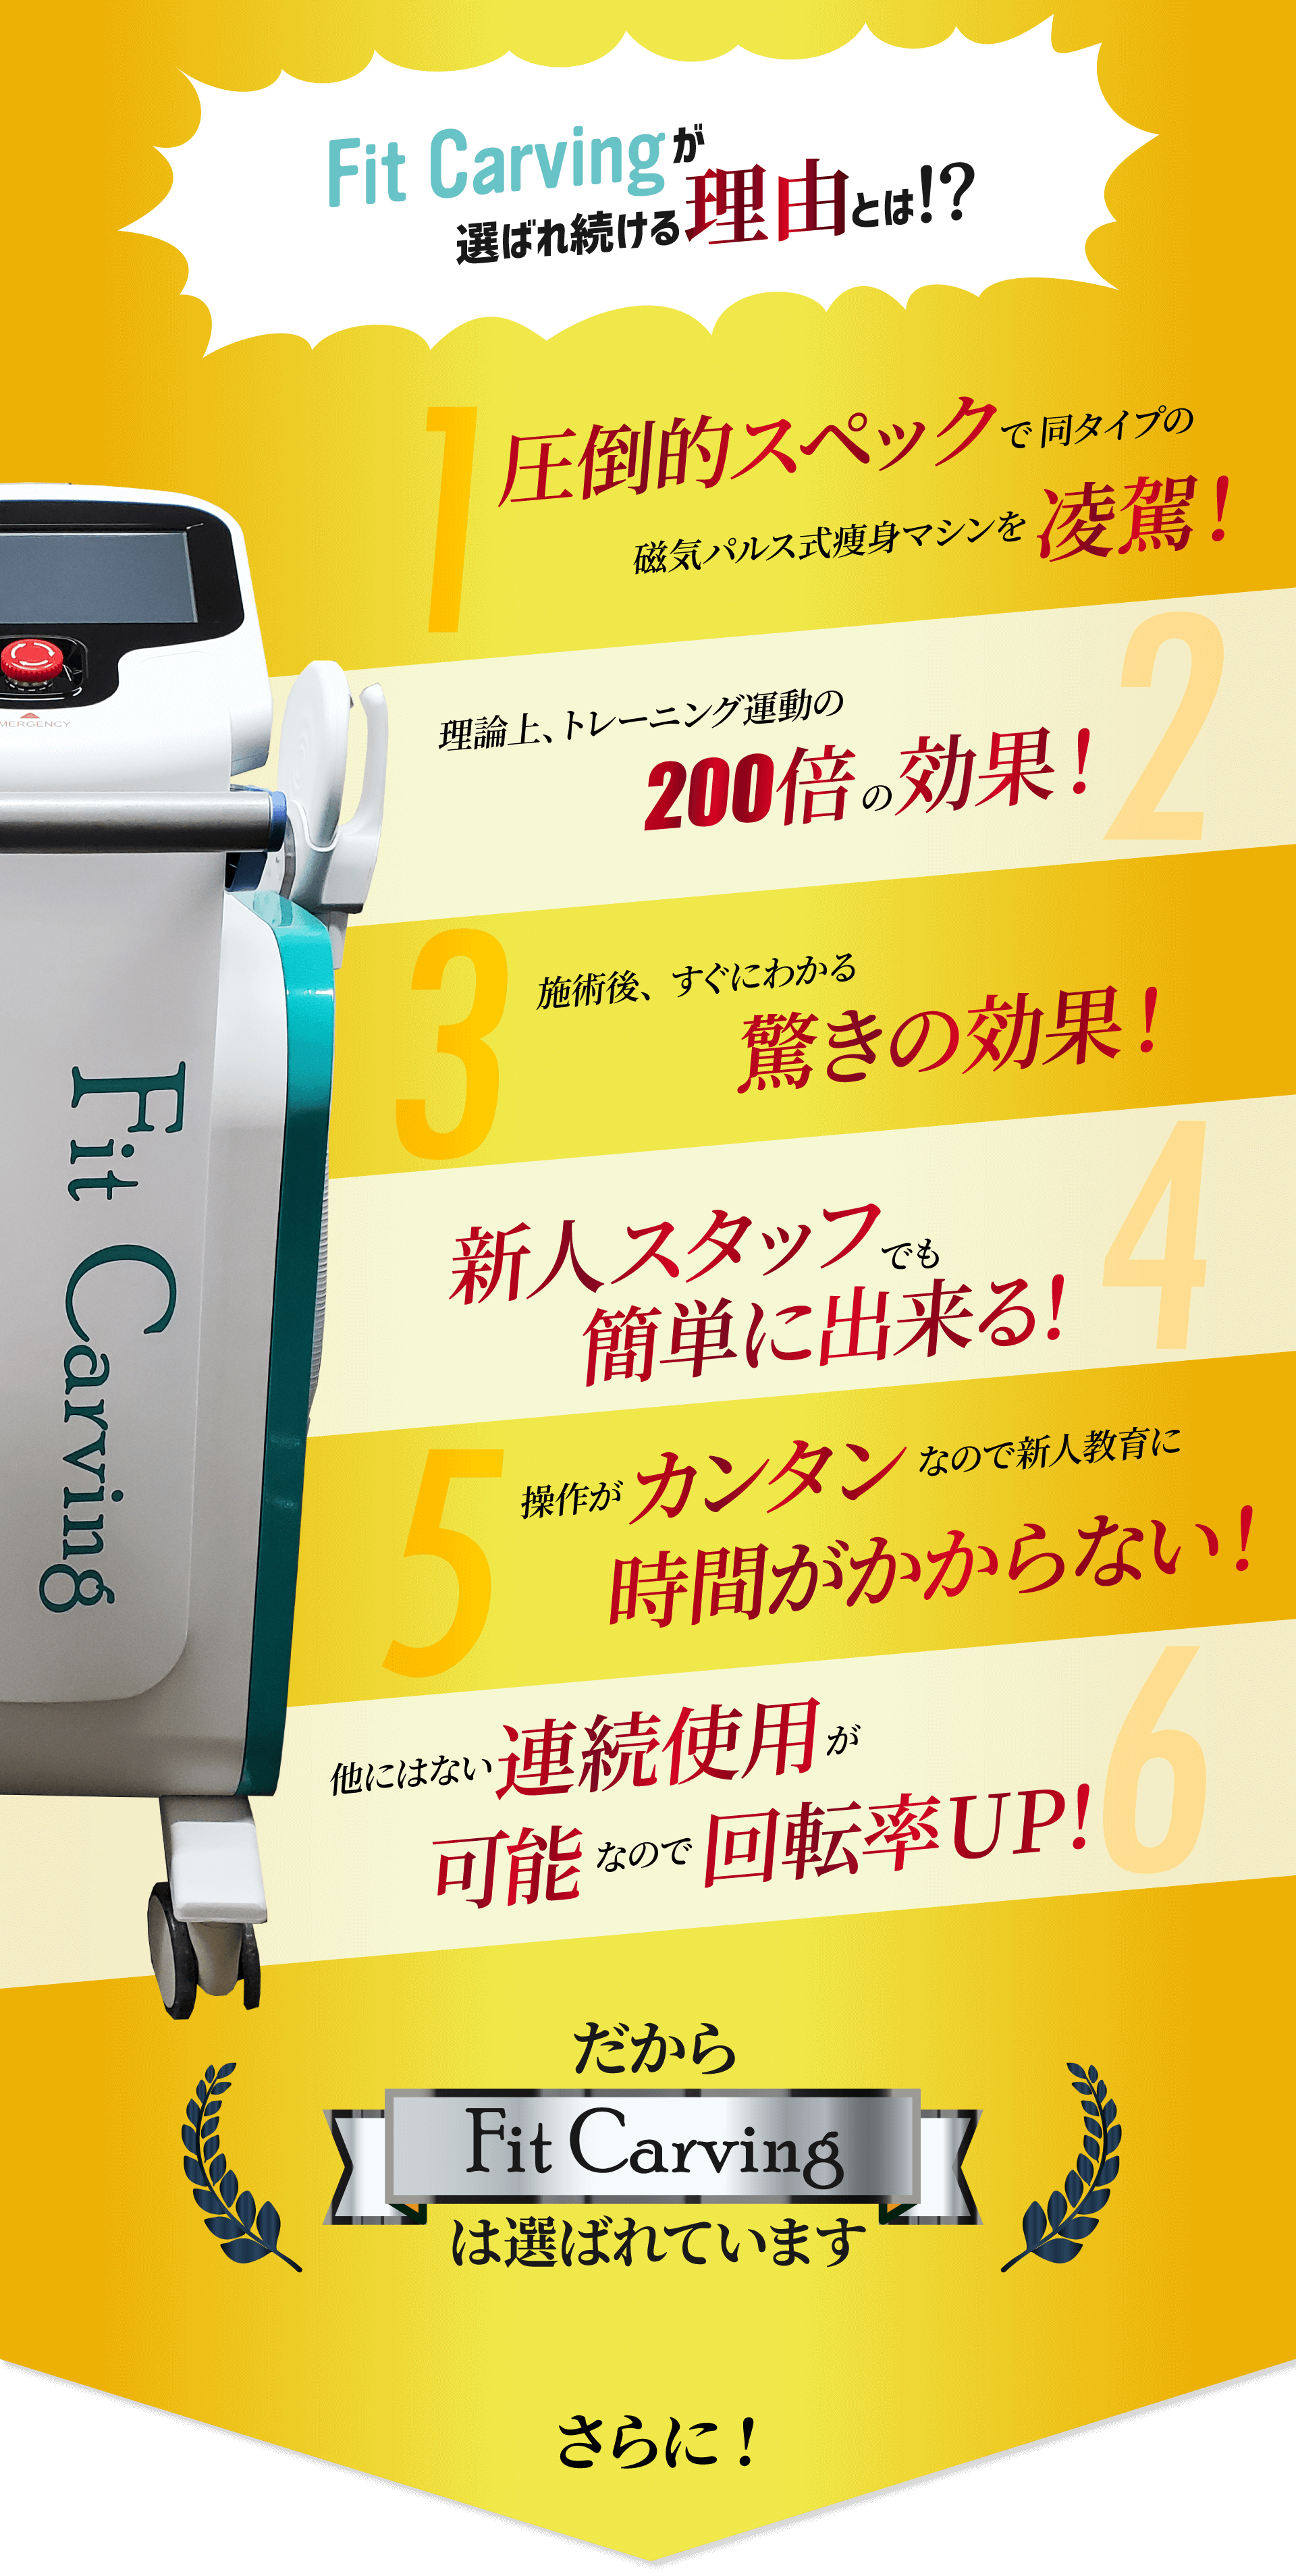 Fit Carvingが選ばれ続ける理由とは！？